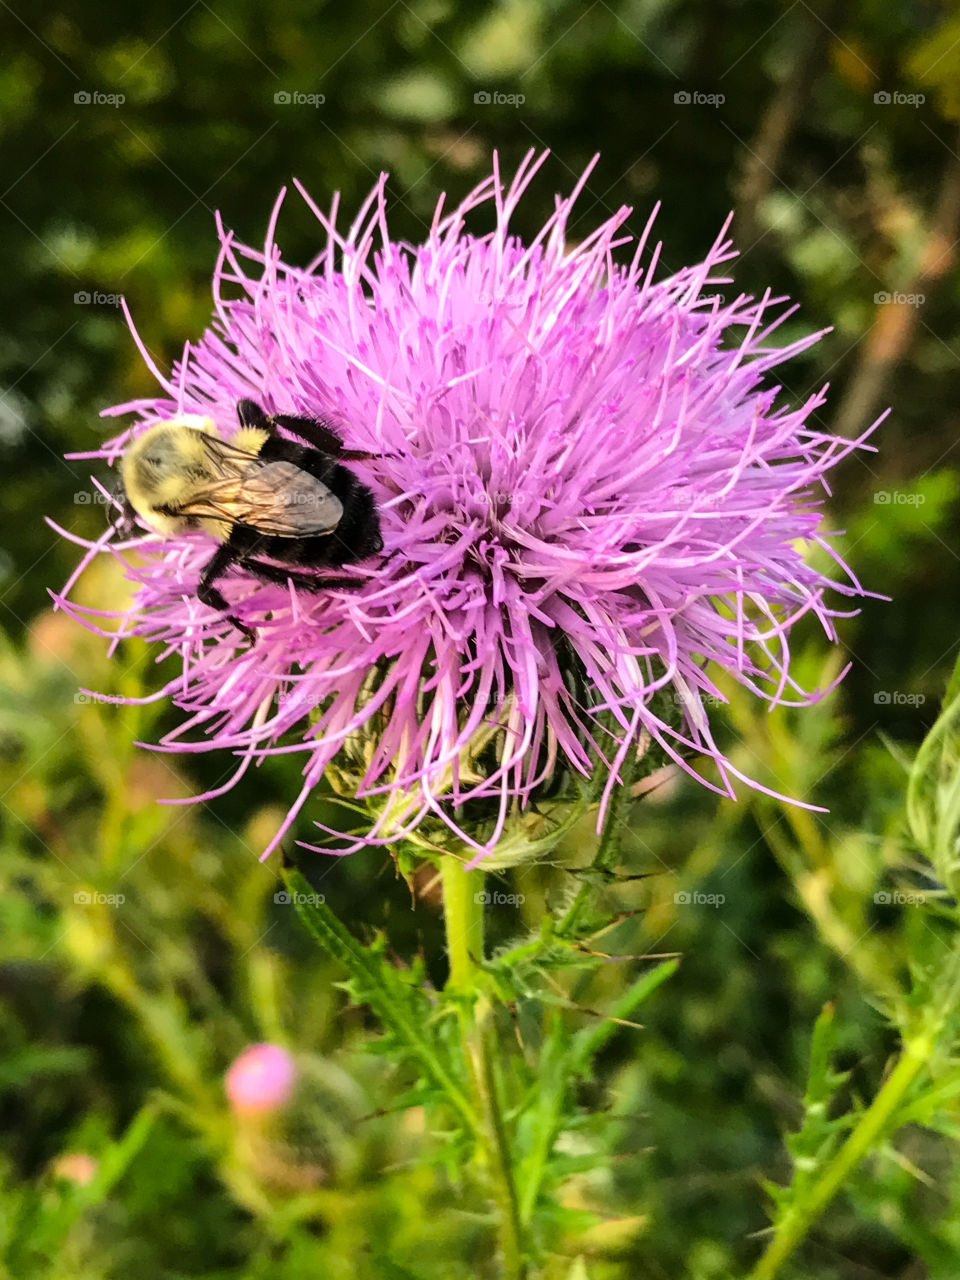 Bumble Bee on purple thistle flower